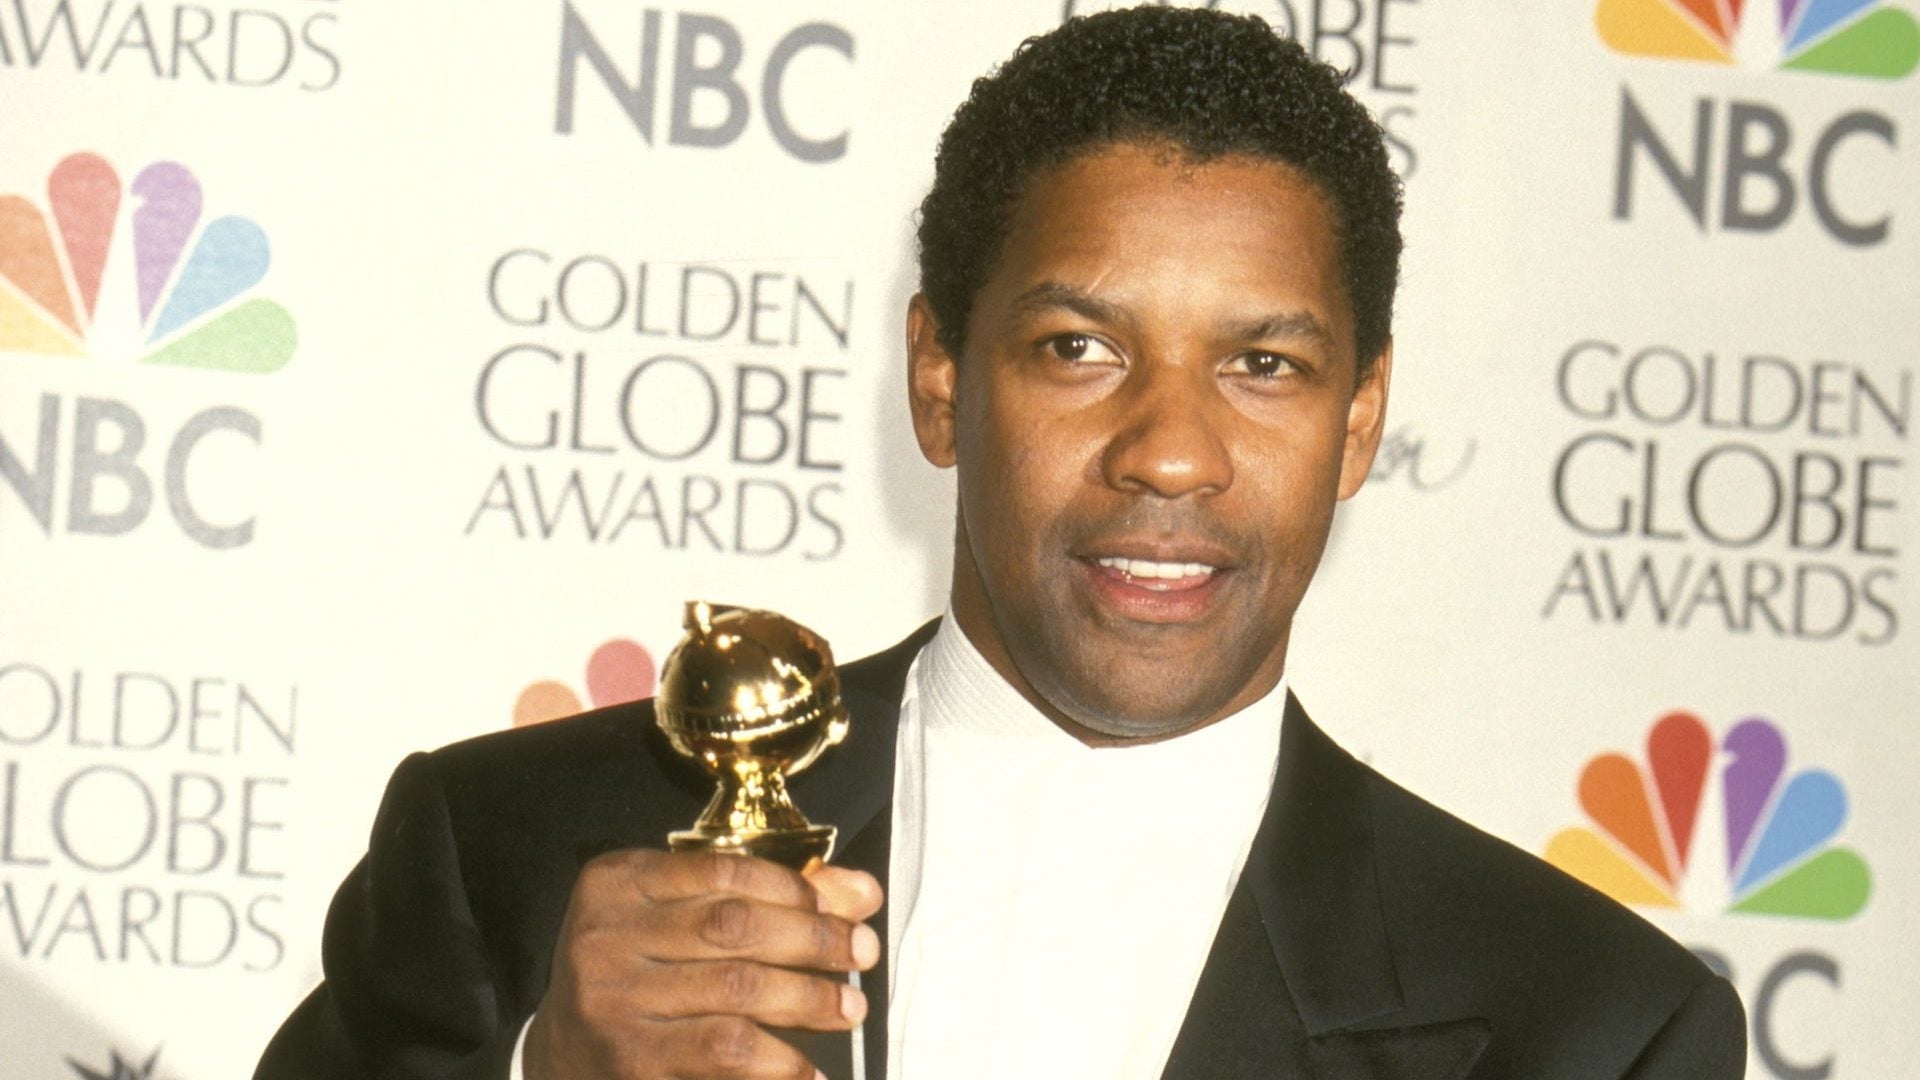 Blast From The Past: Here's What The Golden Globes Red Carpet Looked Like 20 Years Ago